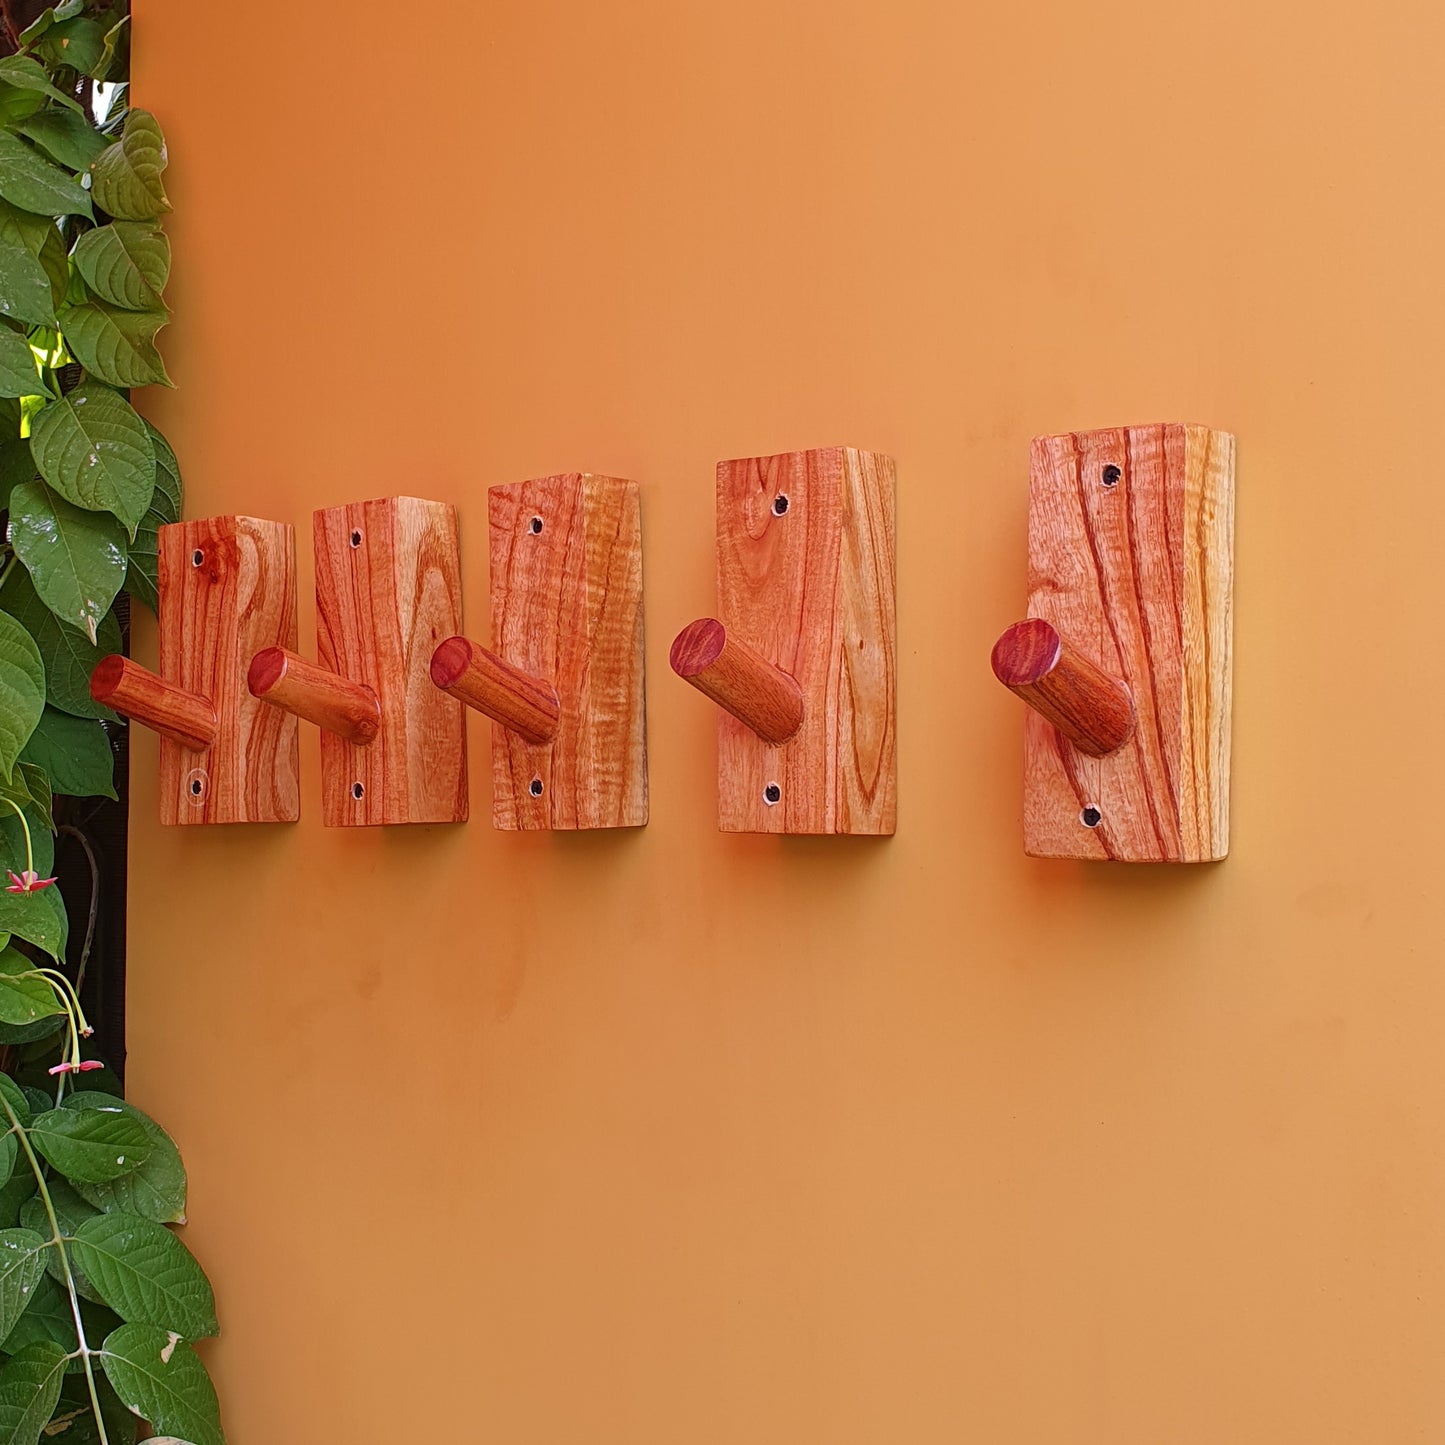 Wooden Hanging Hooks (4Pieces)